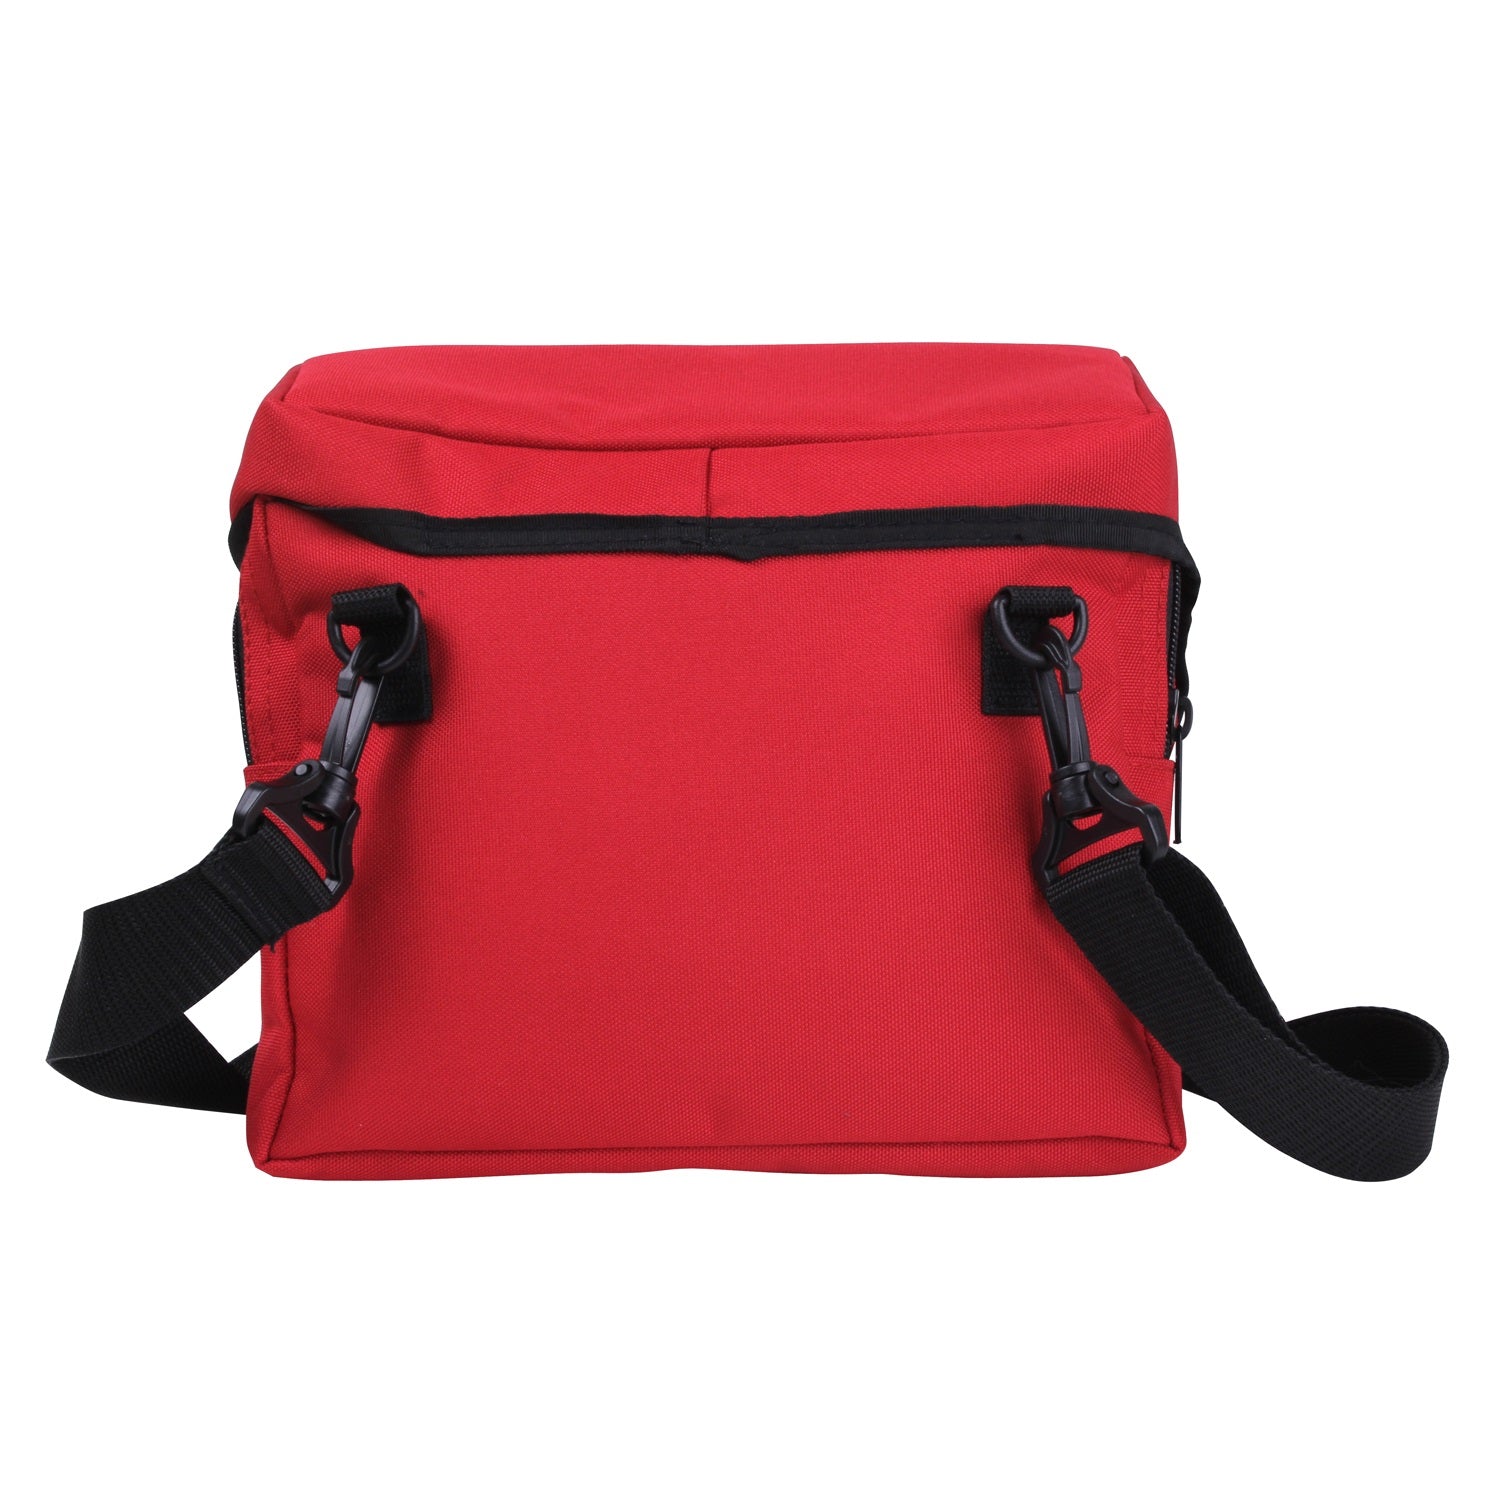 Rothco EMS Medical Field Pouch Red